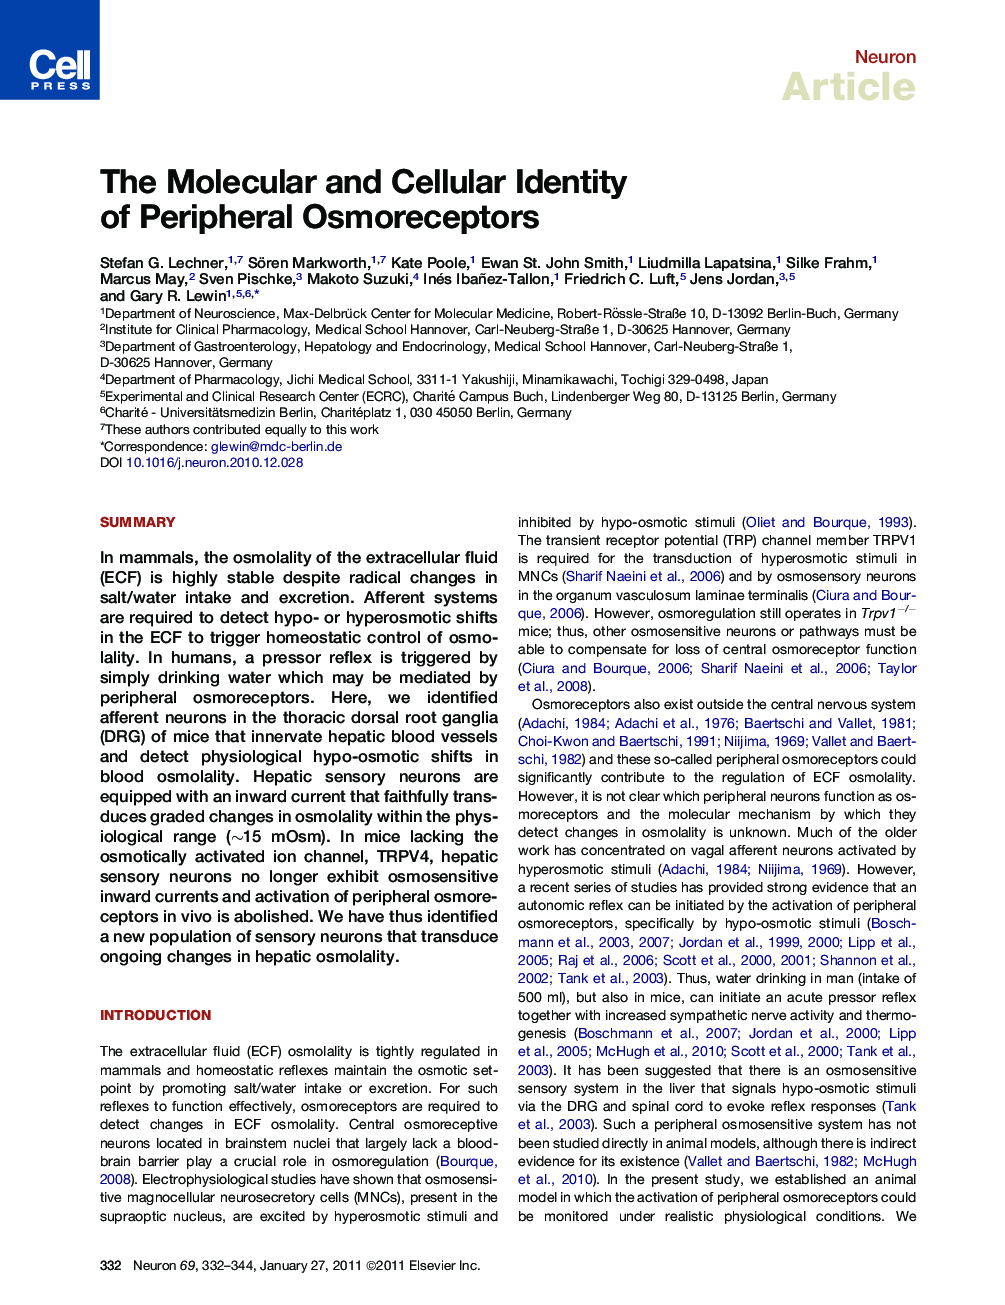 The Molecular and Cellular Identity of Peripheral Osmoreceptors